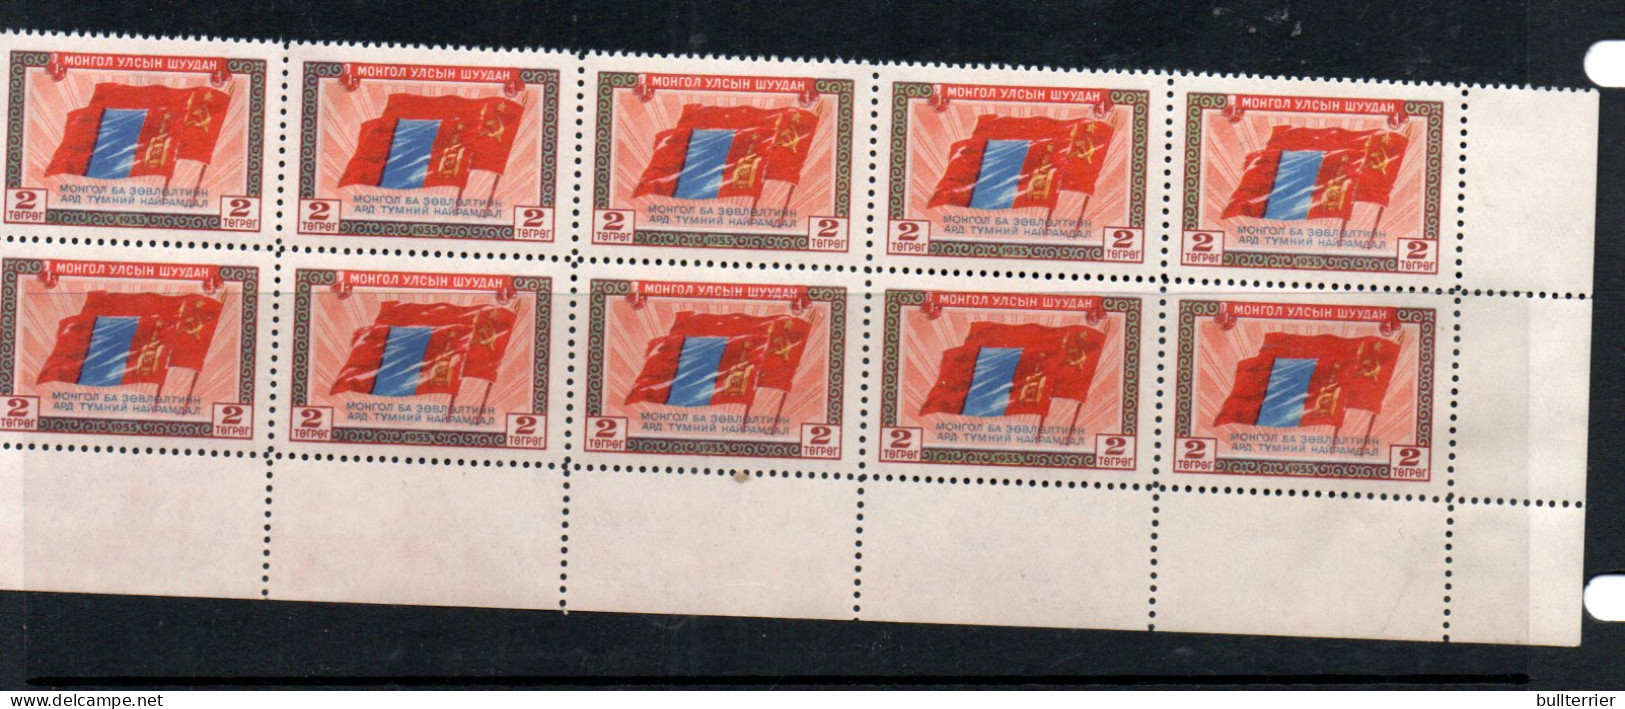 MONGOLIA - 1956 - MONGOL  SOVIET FRIENDSHIP FLAGS  2T  IN BLOCK OF 10  MINT NEVER HINGED , SG CAT £90 - Mongolei